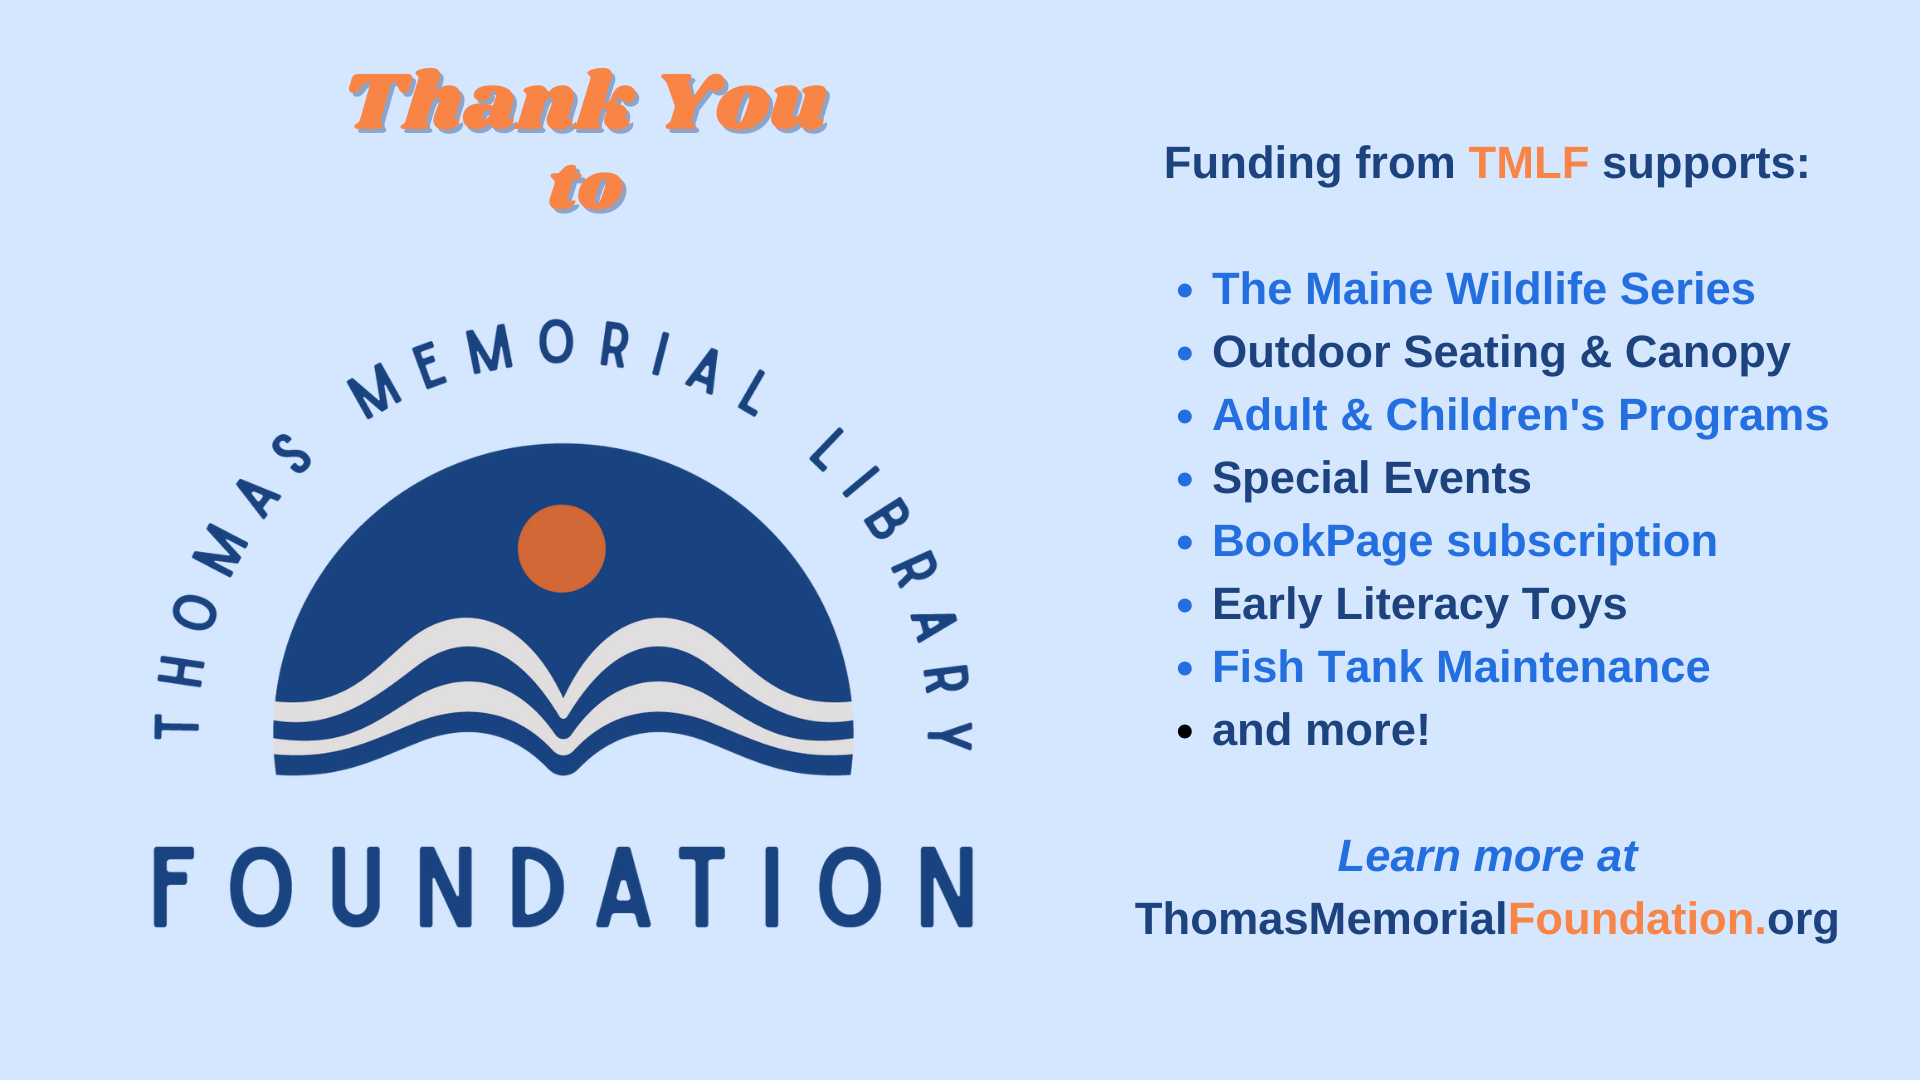 Thank you to the Thomas Memorial Library Foundation